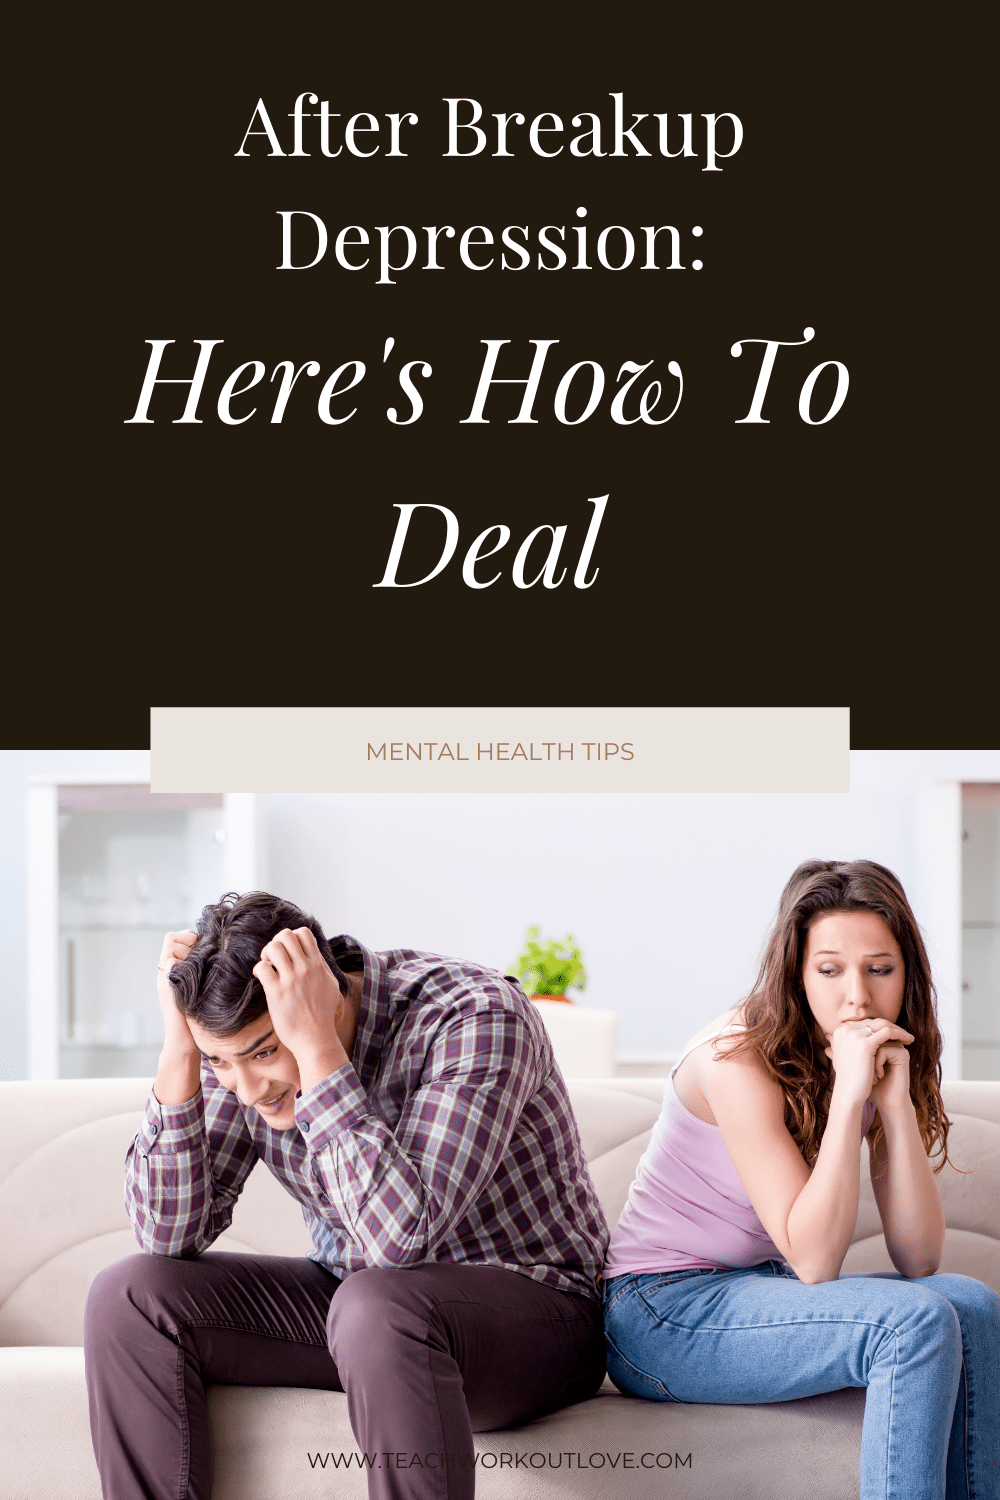 Breakups are not easy, especially if your relationship lasted for a couple of years. Here's tips for how to cope with depression after a breakup.